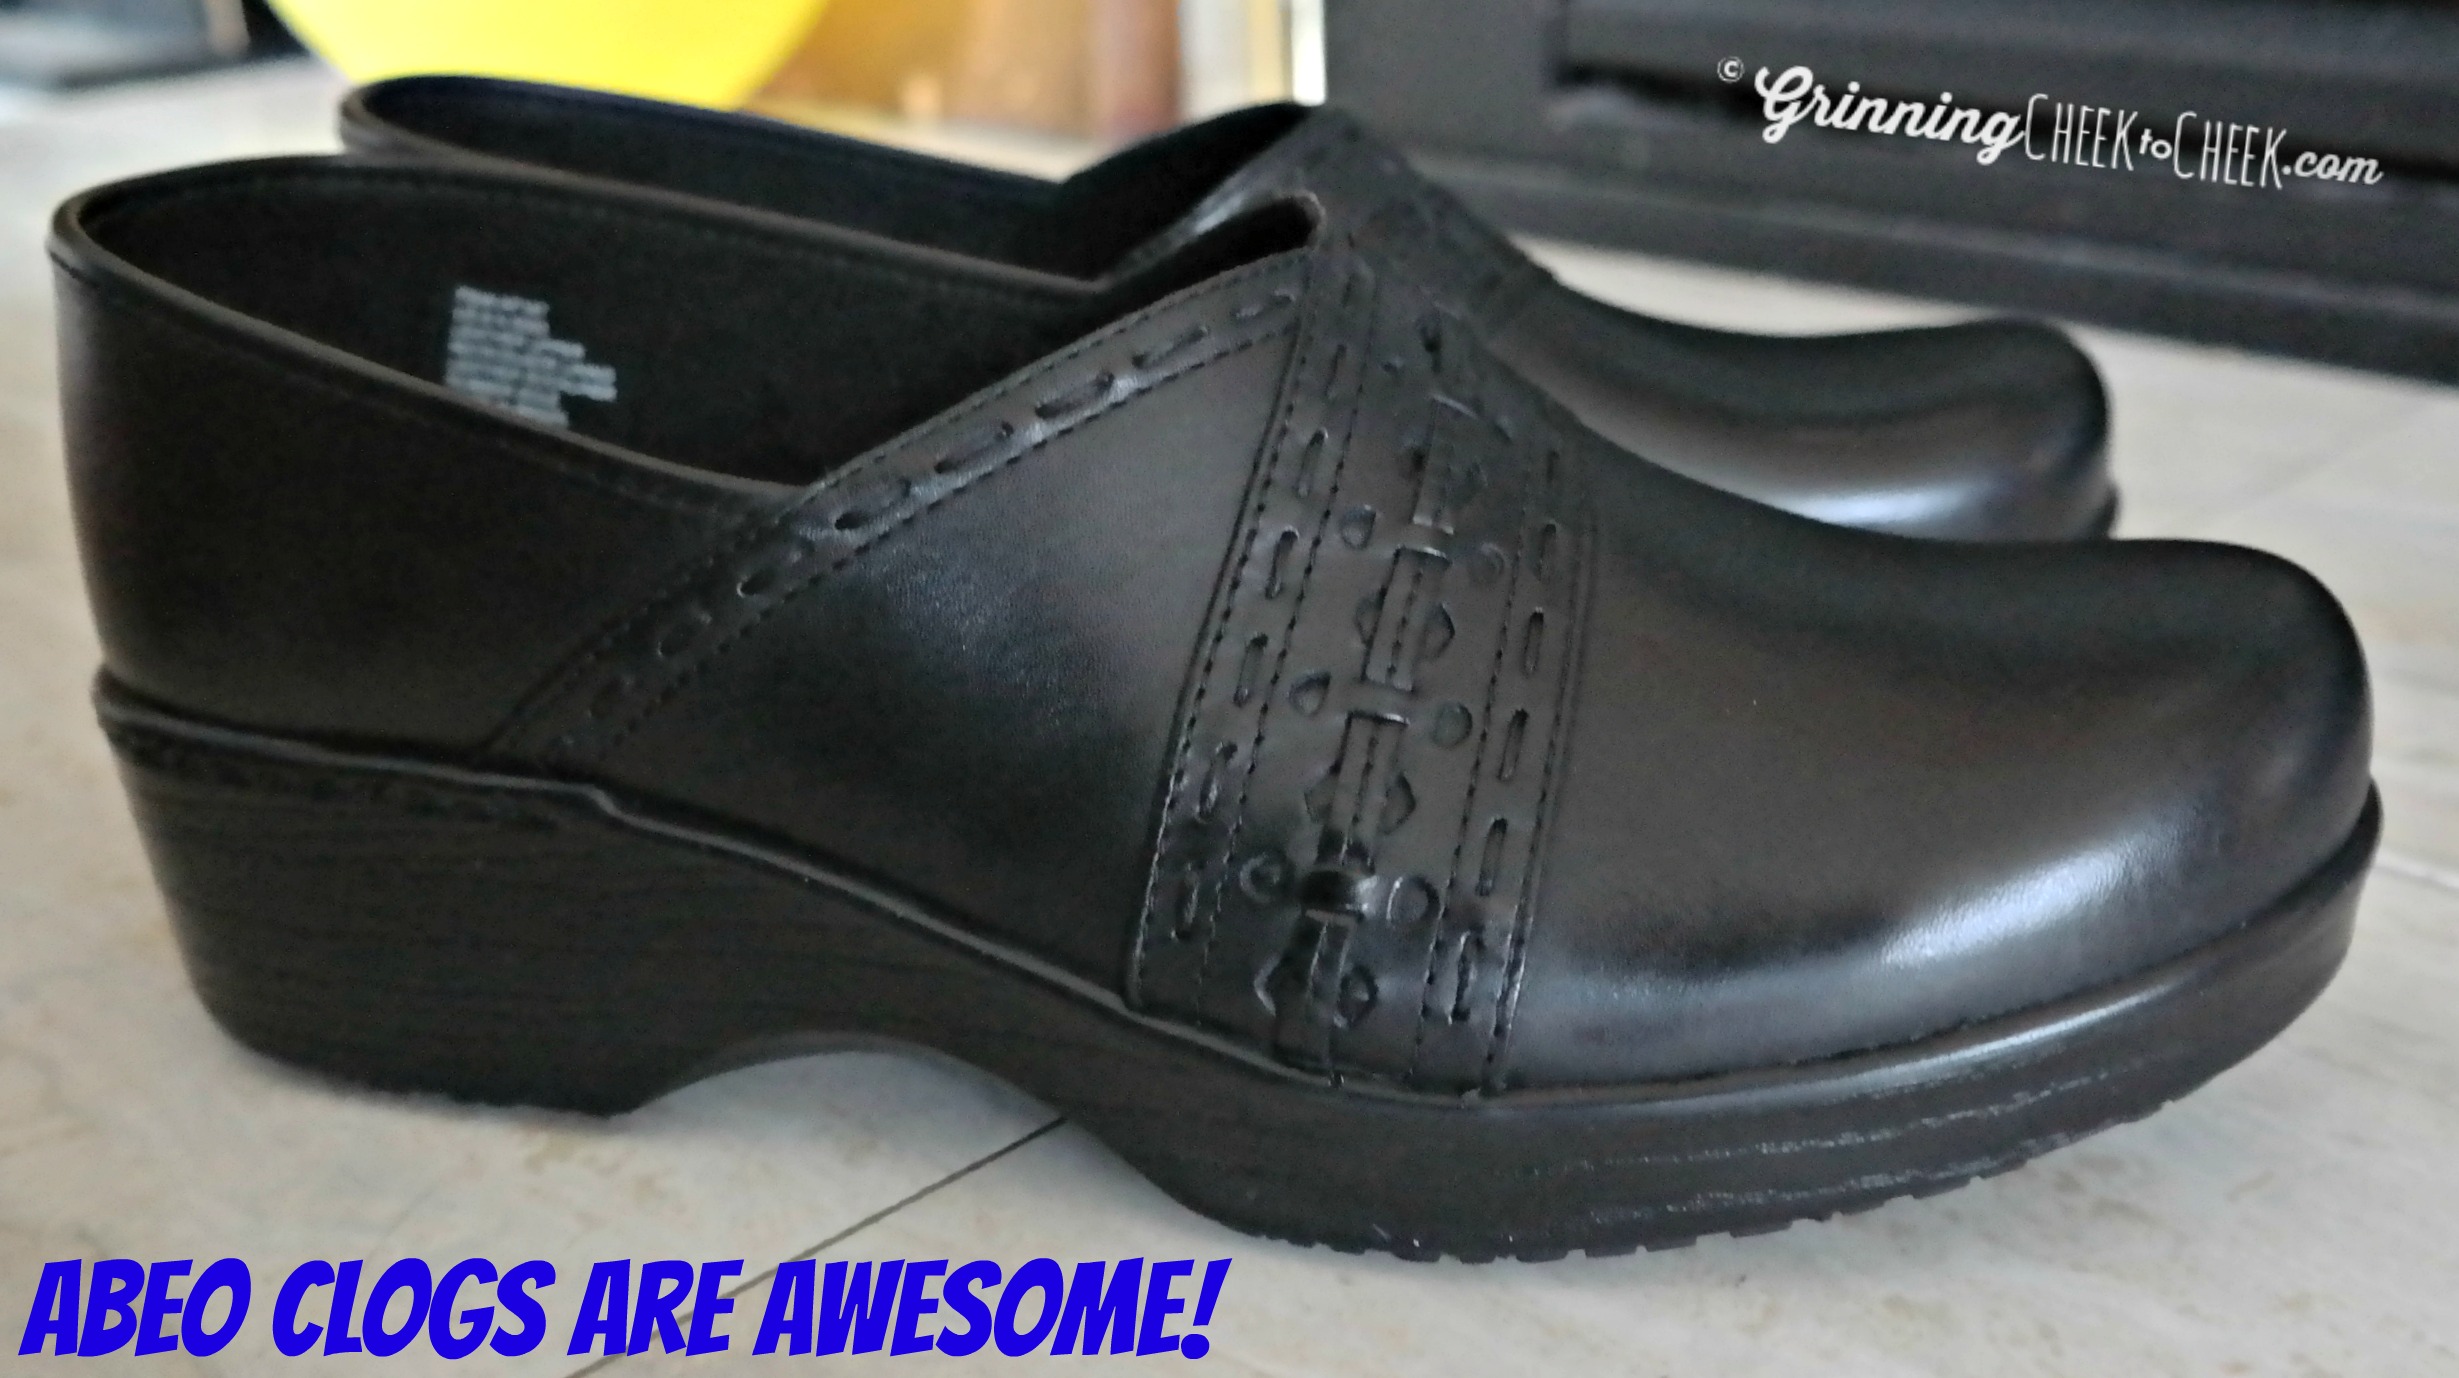 ABEO Clogs are Awesome!